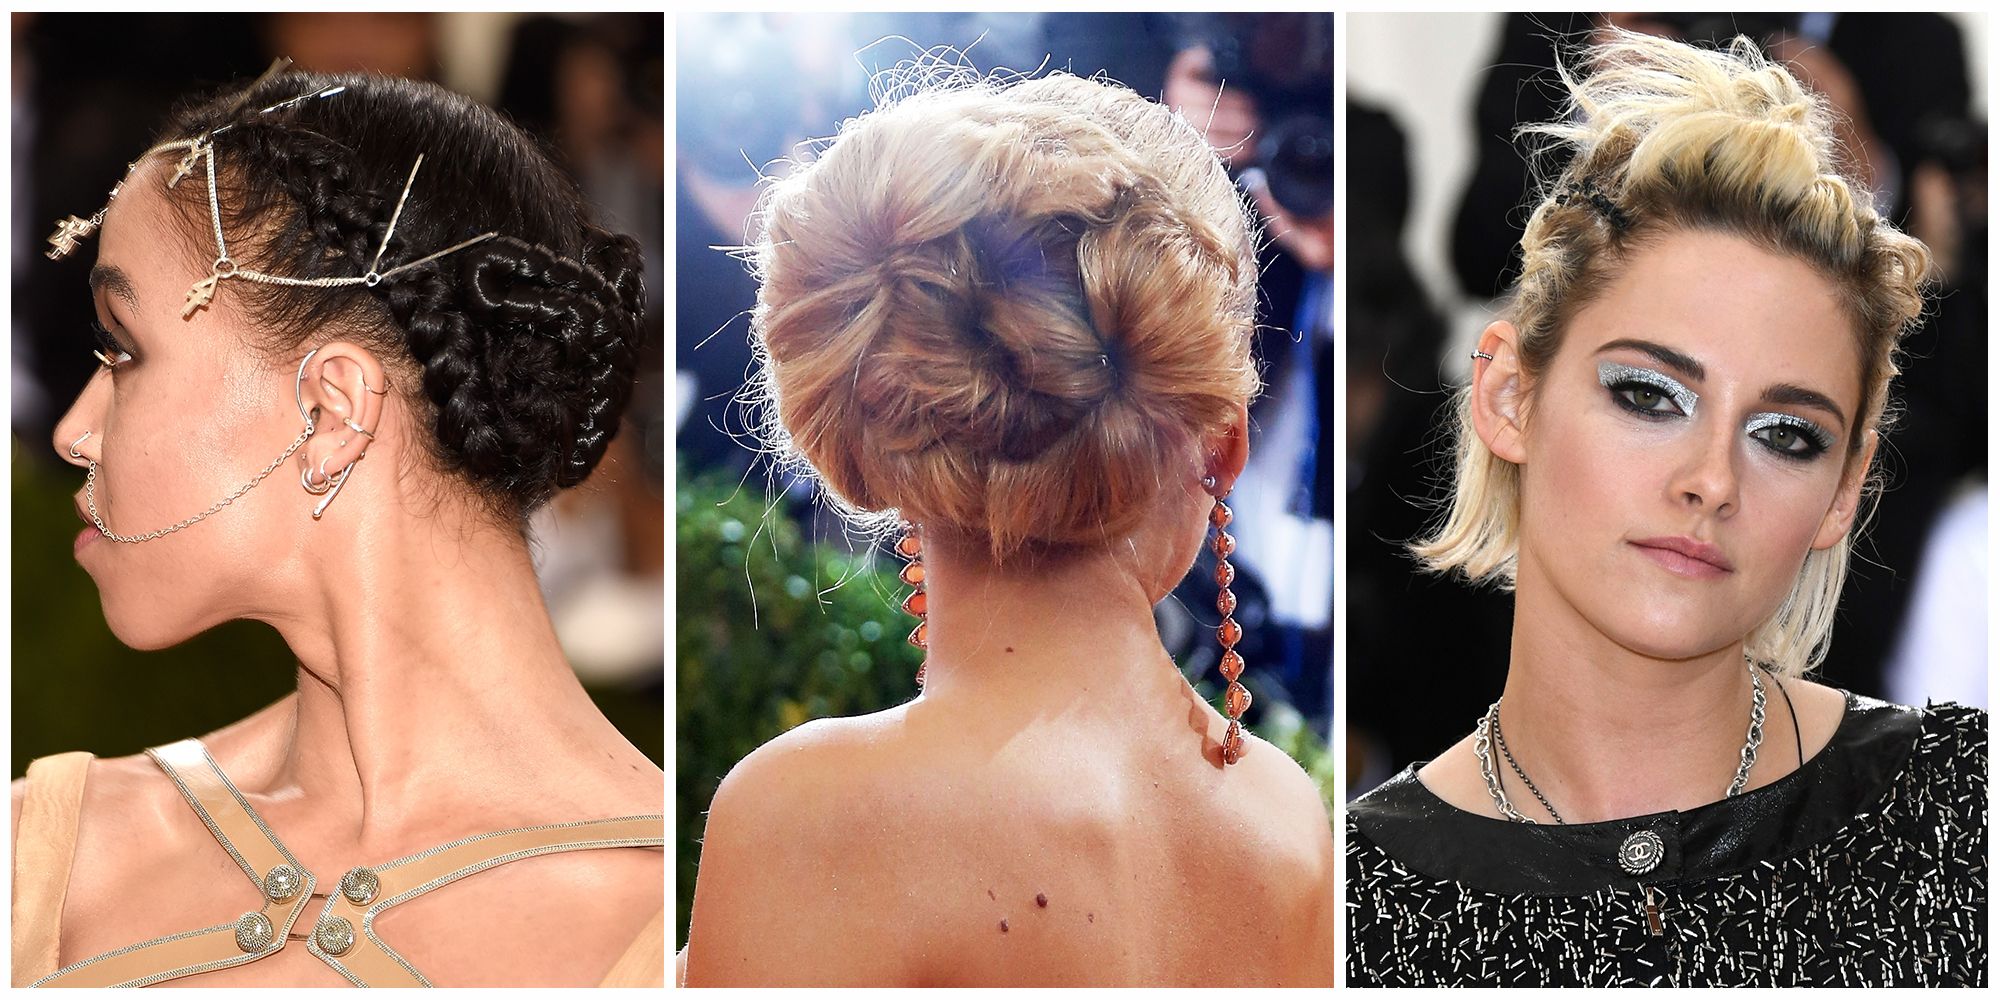 10 Best Updo Hairstyles for Women in Fall 2018 - Celebrity Inspired Hair  Updos